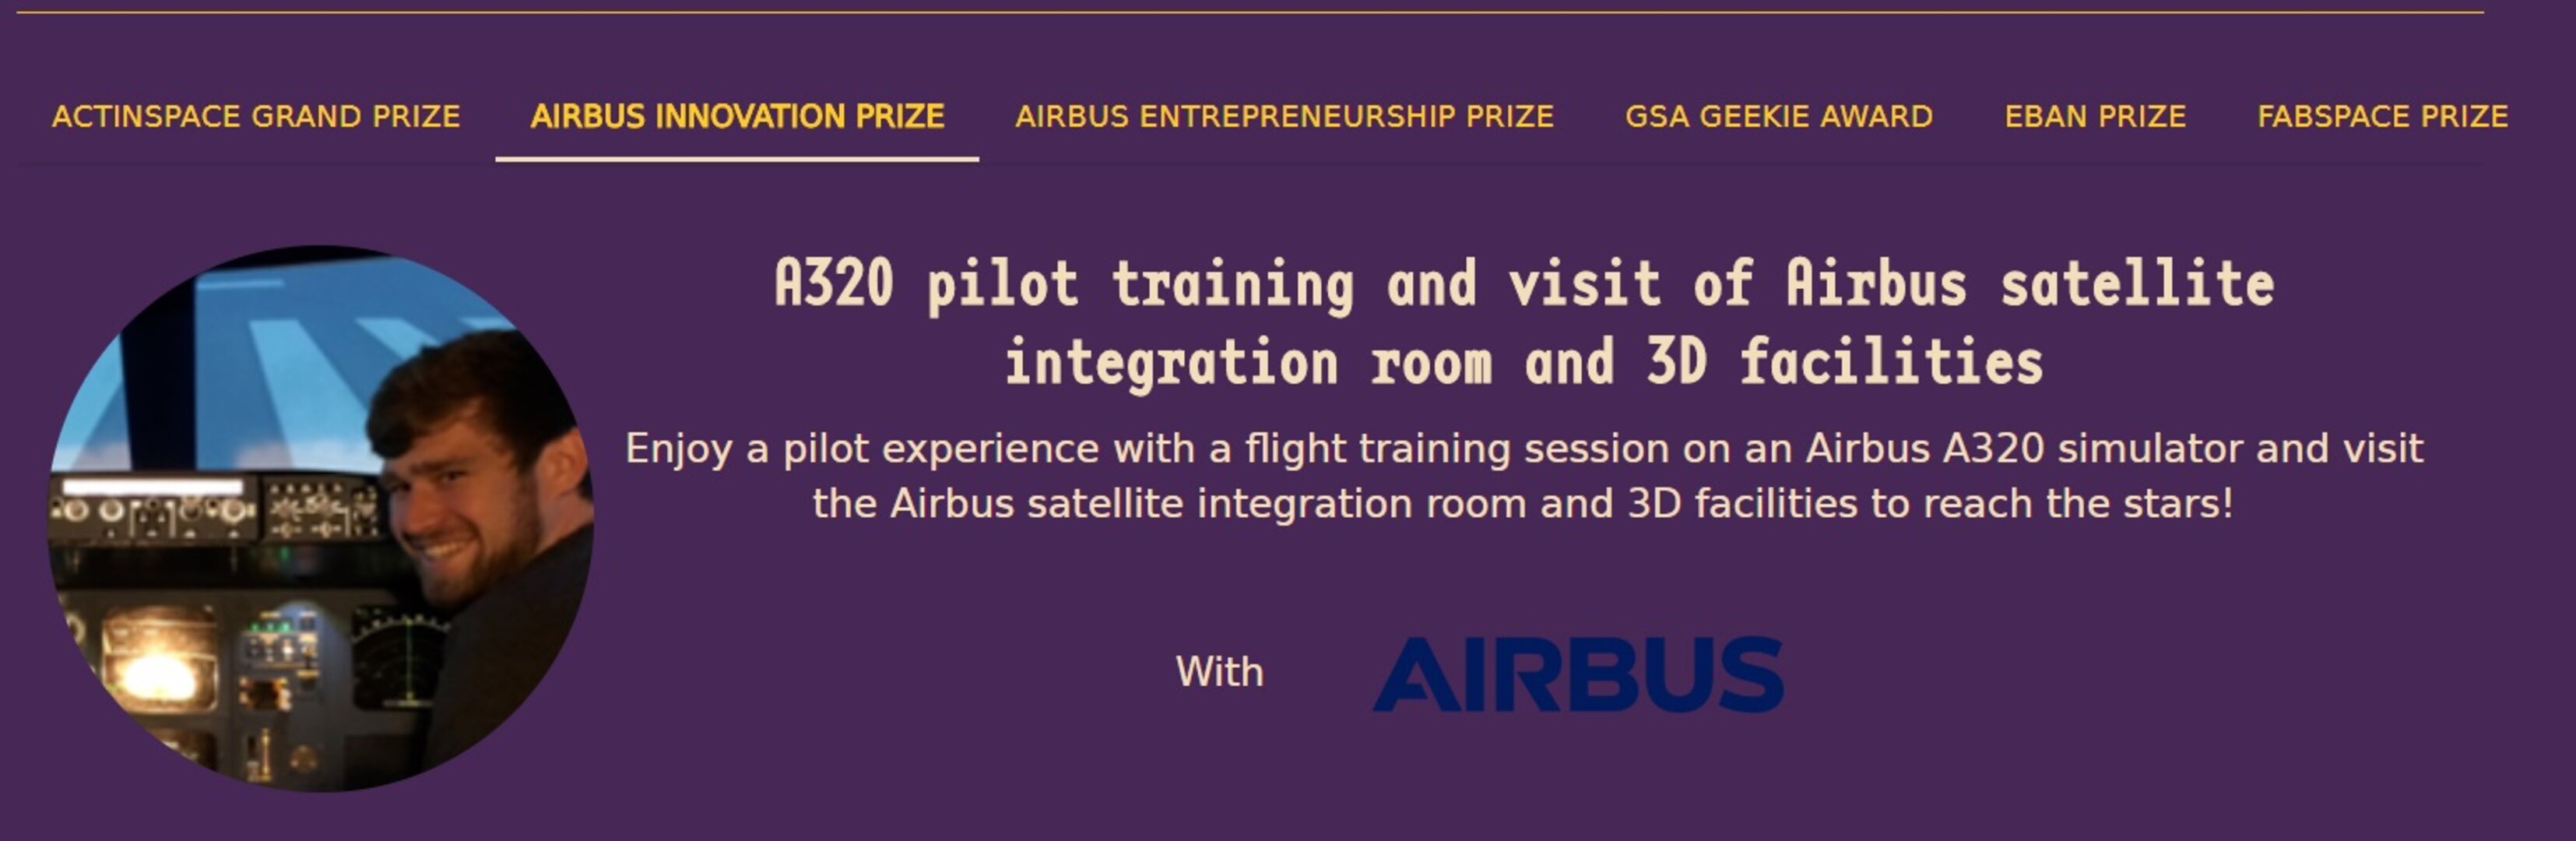 ﻿ActInSpace 2018 - AIRBUS INNOVATION PRIZE